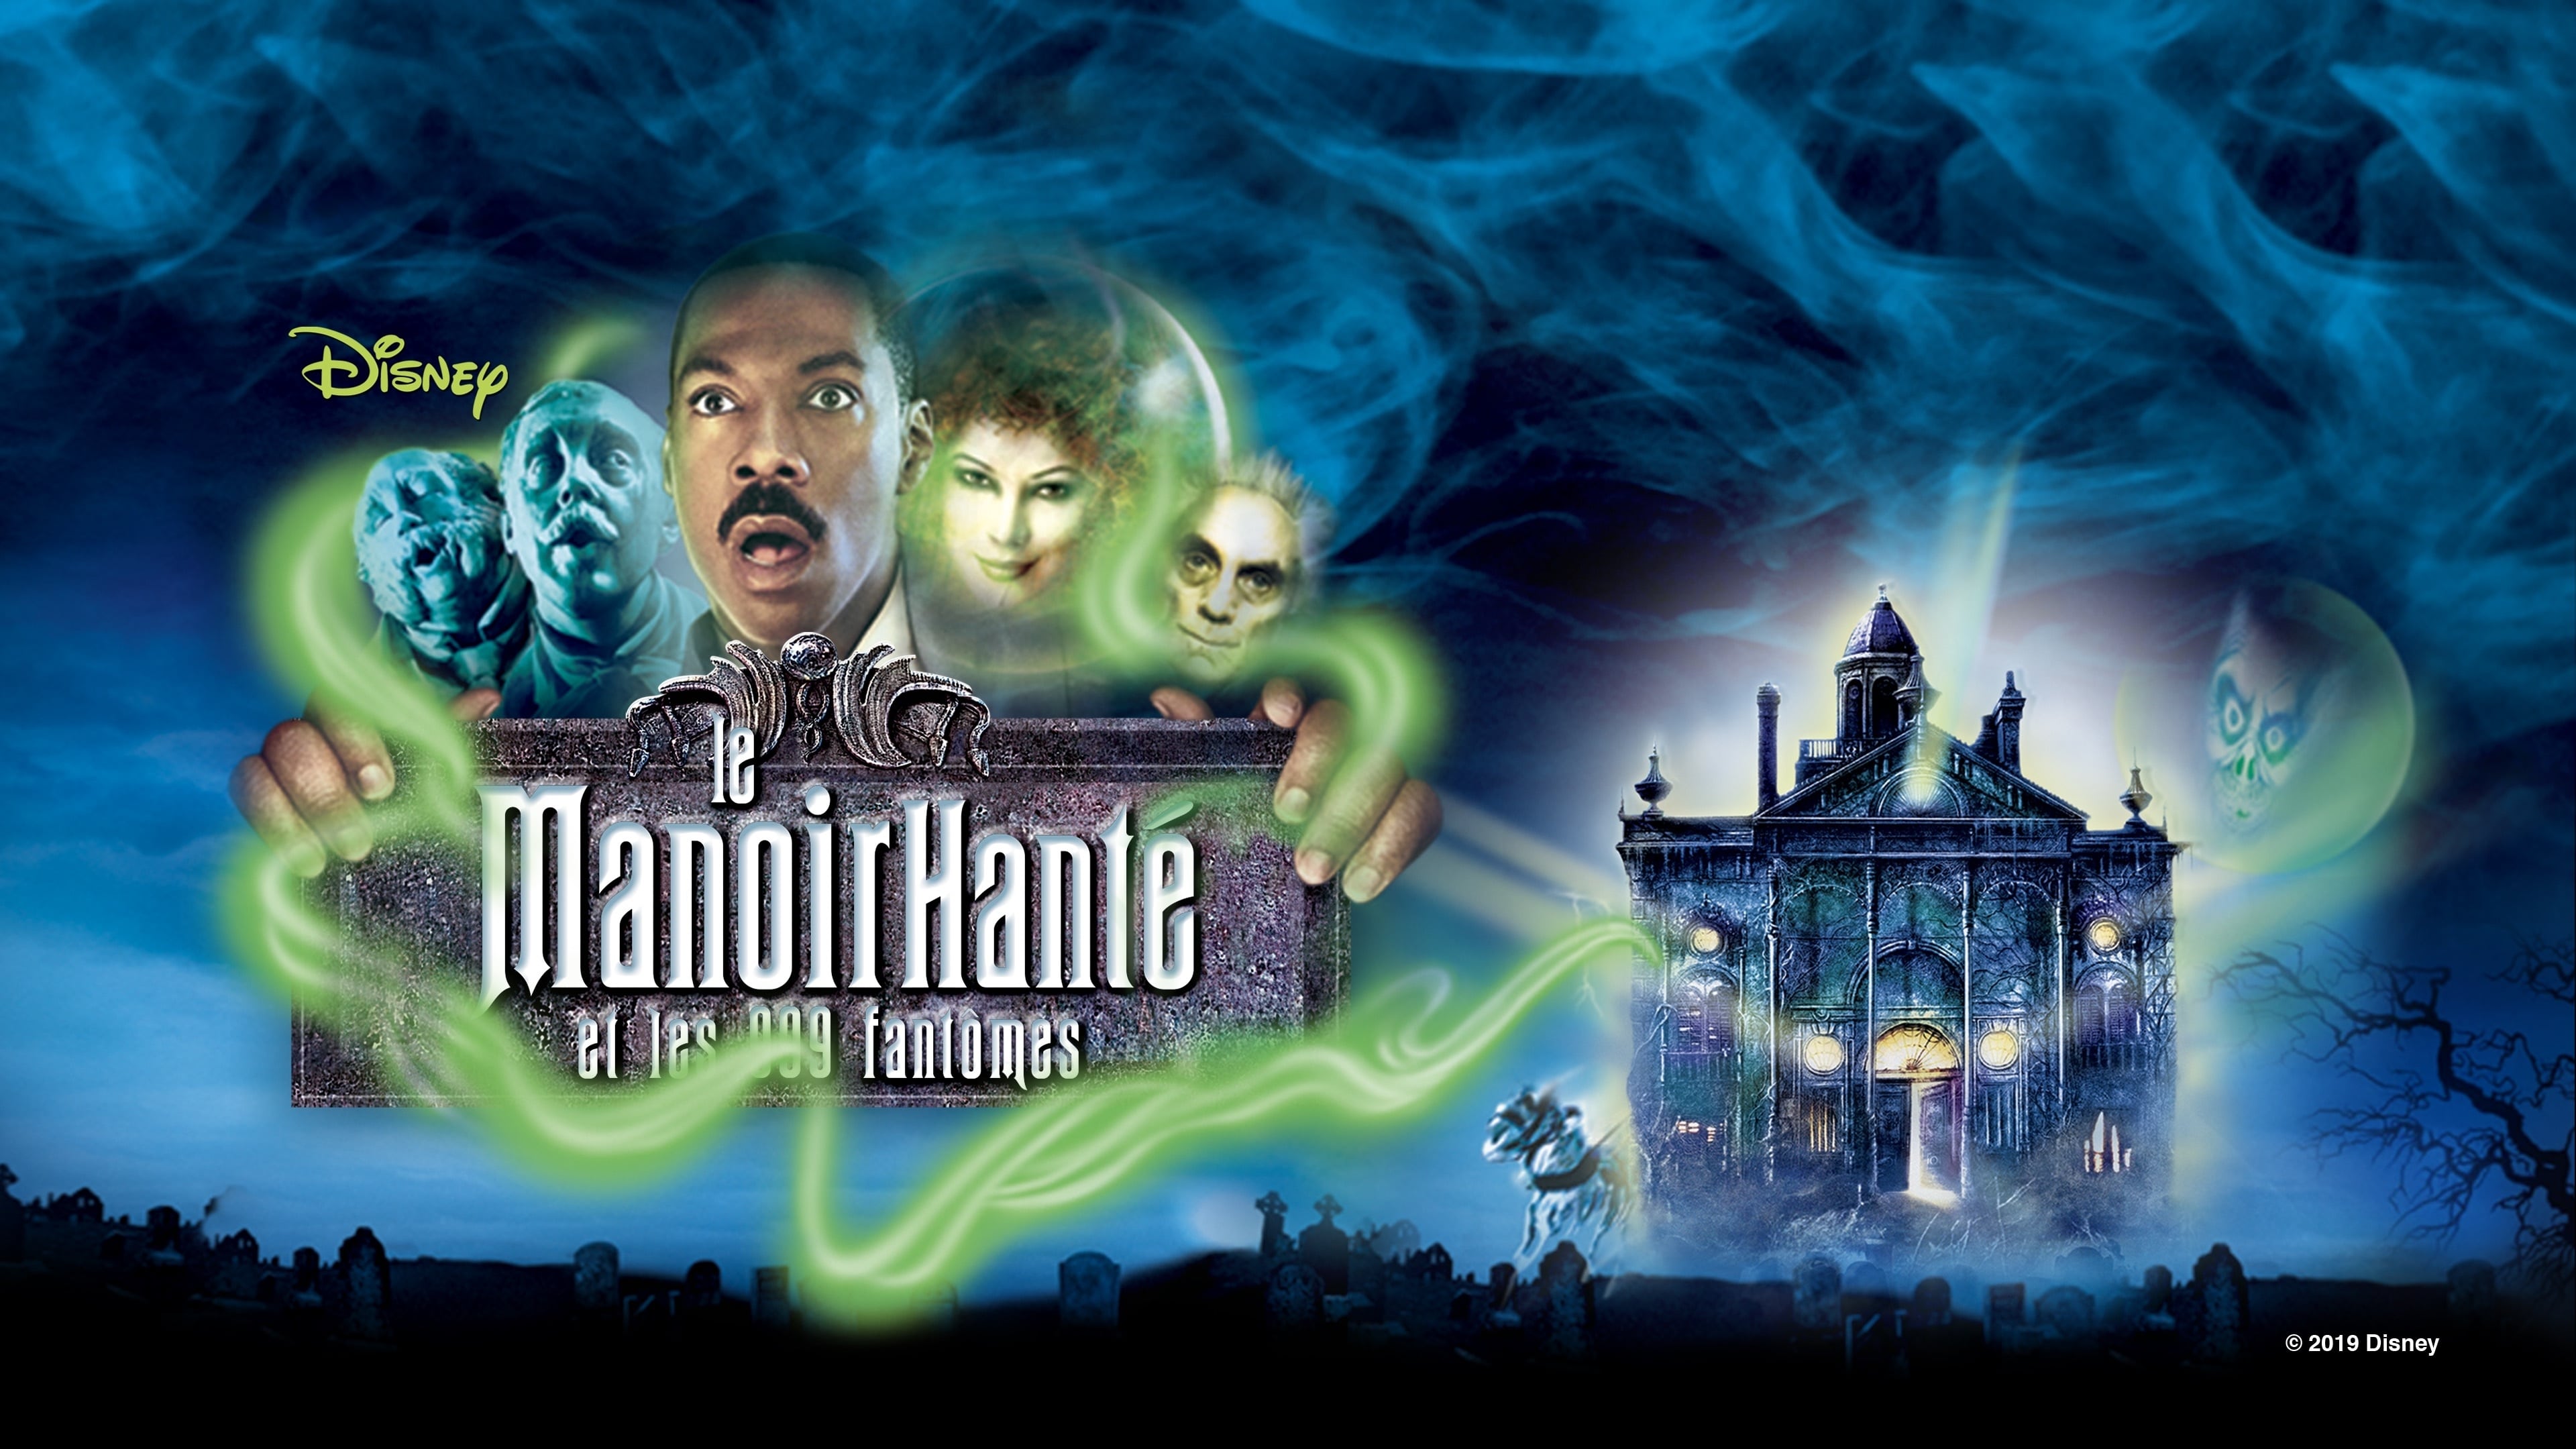 the haunted mansion movie cast